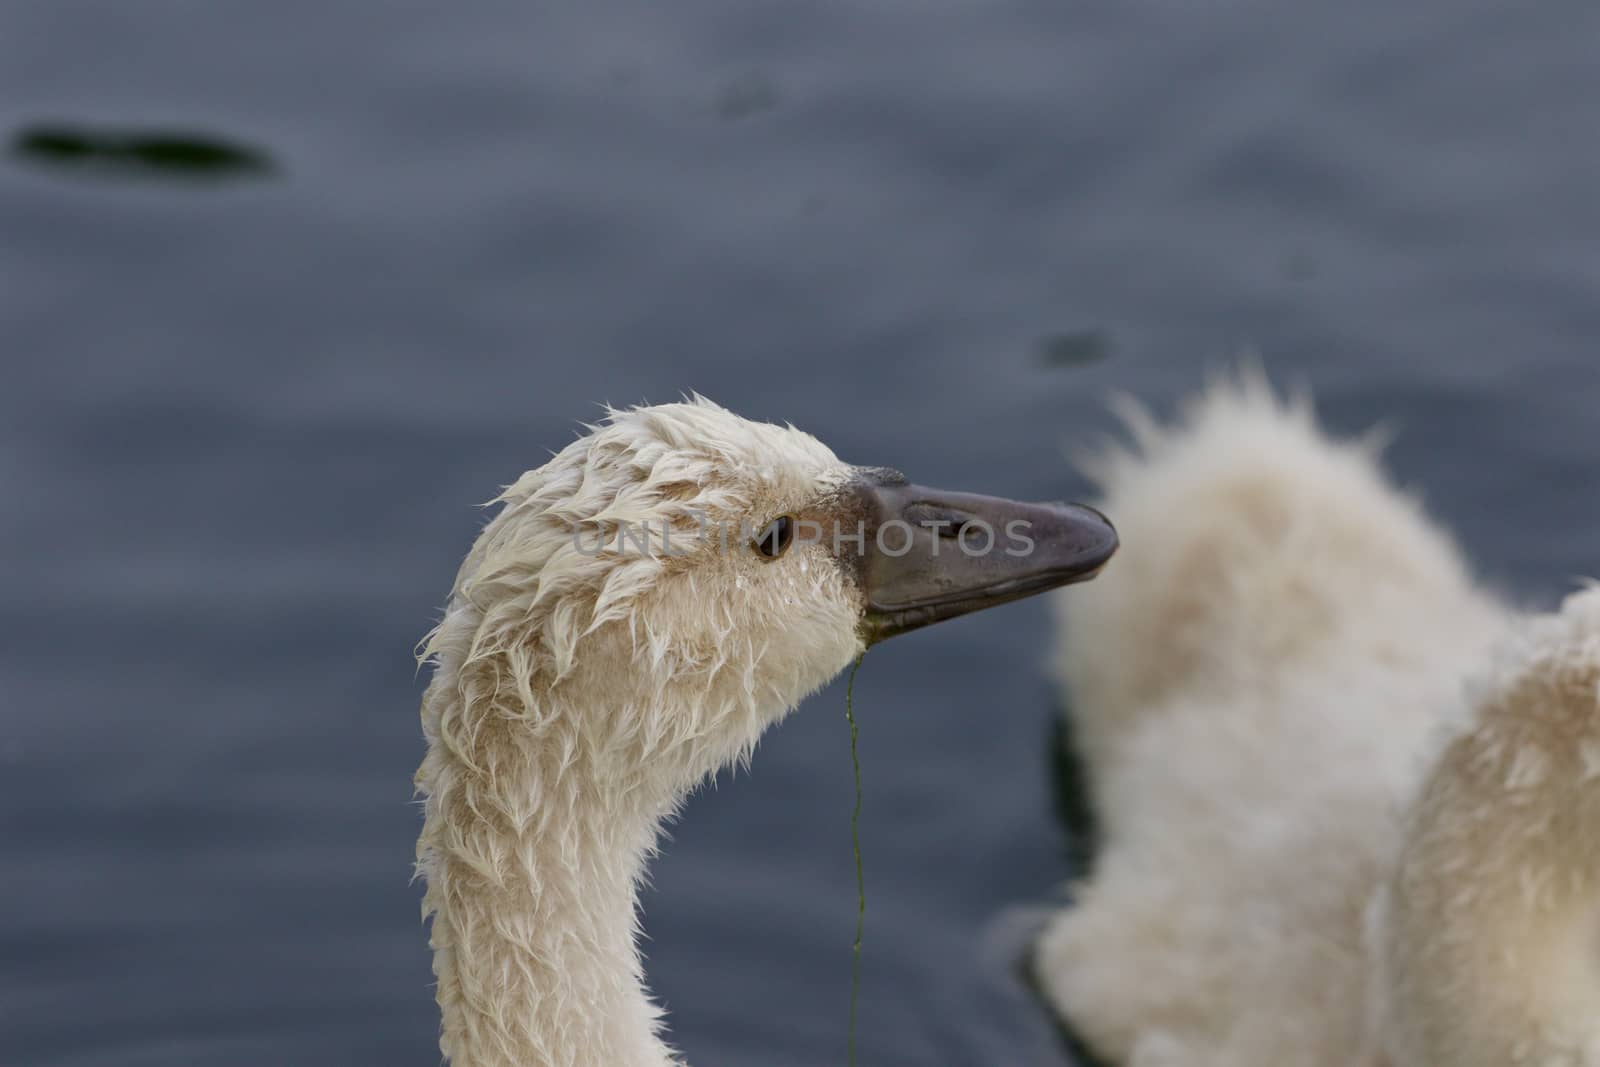 The young mute swan is searching for something